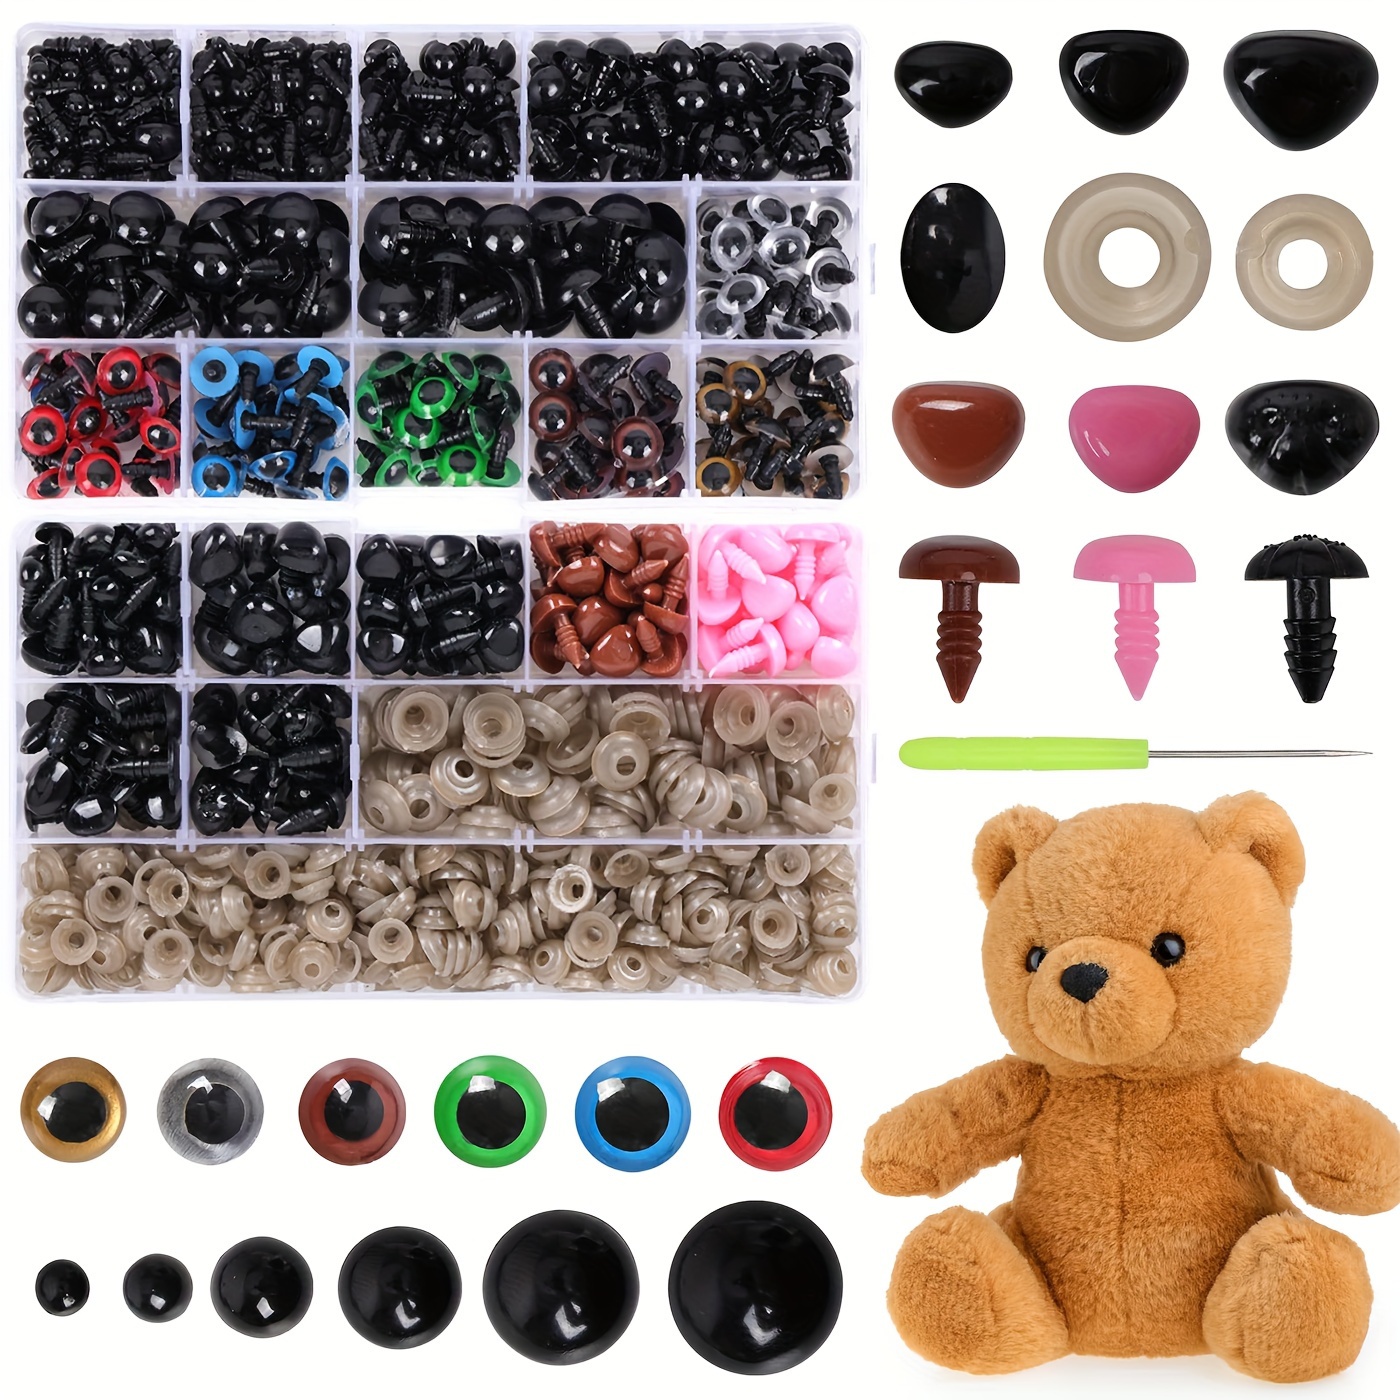 Menkey Plastic Safety Eyes and Noses with Washers 570 Pcs, Craft Doll Eyes and Teddy Bear Nose for Amigurumi, Crafts, Crochet Toy and Stuffed Animals